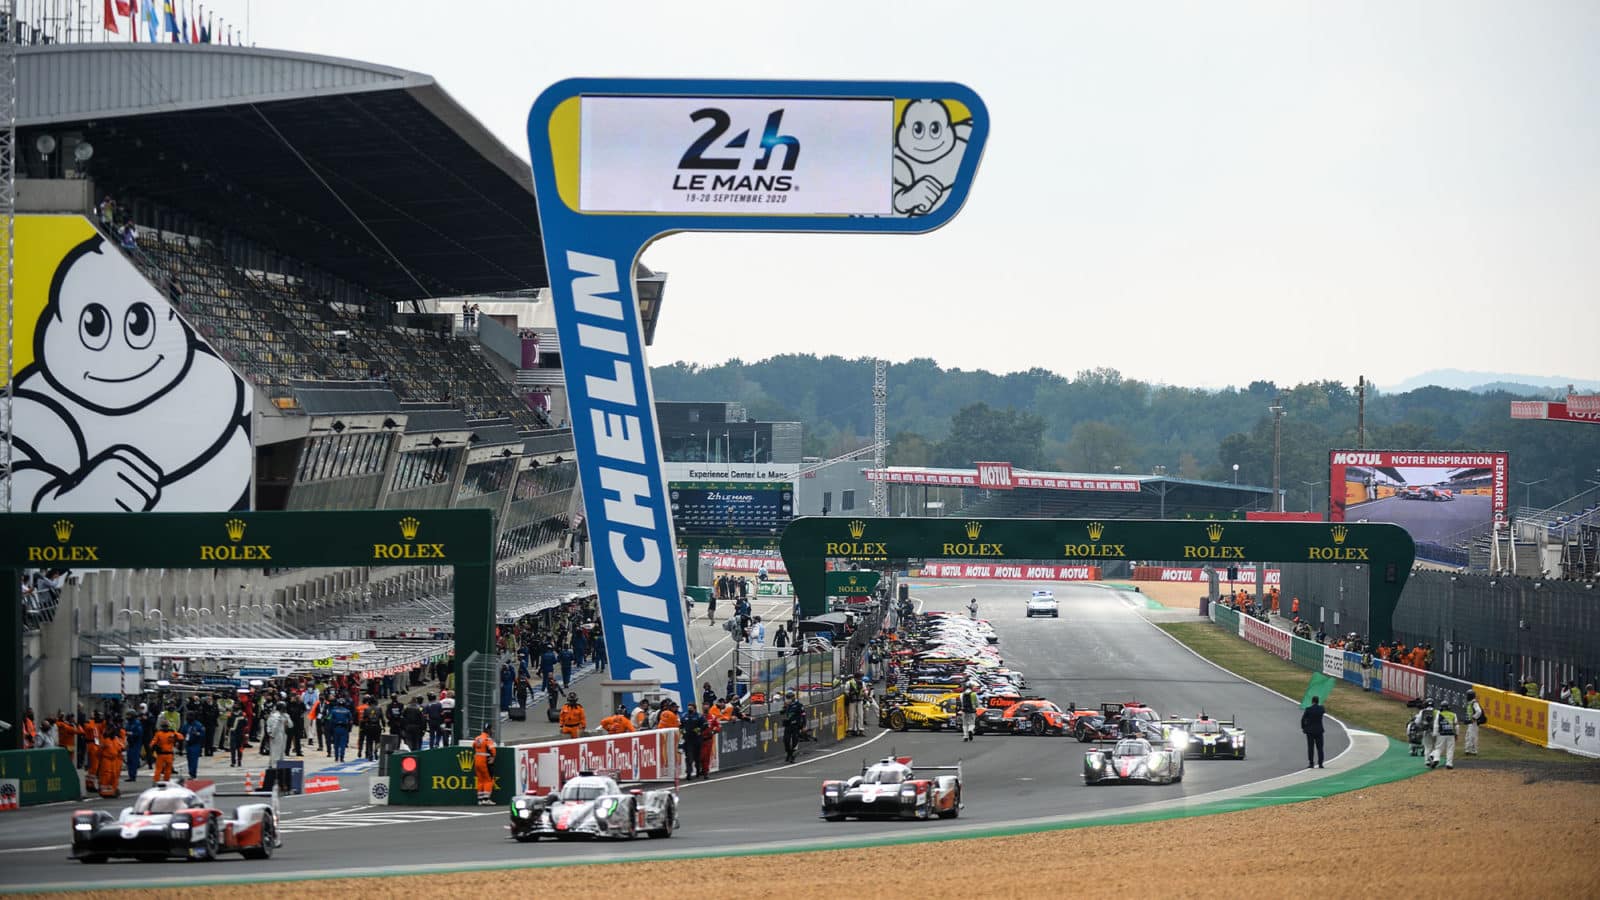 Drivers leave the pit lane for the warm up lap prior to the start of the 88th edition of the Le Mans 24 Hours race on September 19, 2020 at the La Sarthe circuit in Le Mans, in front of empty stands with Covid-19 keeping away the motorsport classic's normal crowd of 250,000 diehard fans. (Photo by JEAN-FRANCOIS MONIER / AFP) (Photo by JEAN-FRANCOIS MONIER/AFP via Getty Images)